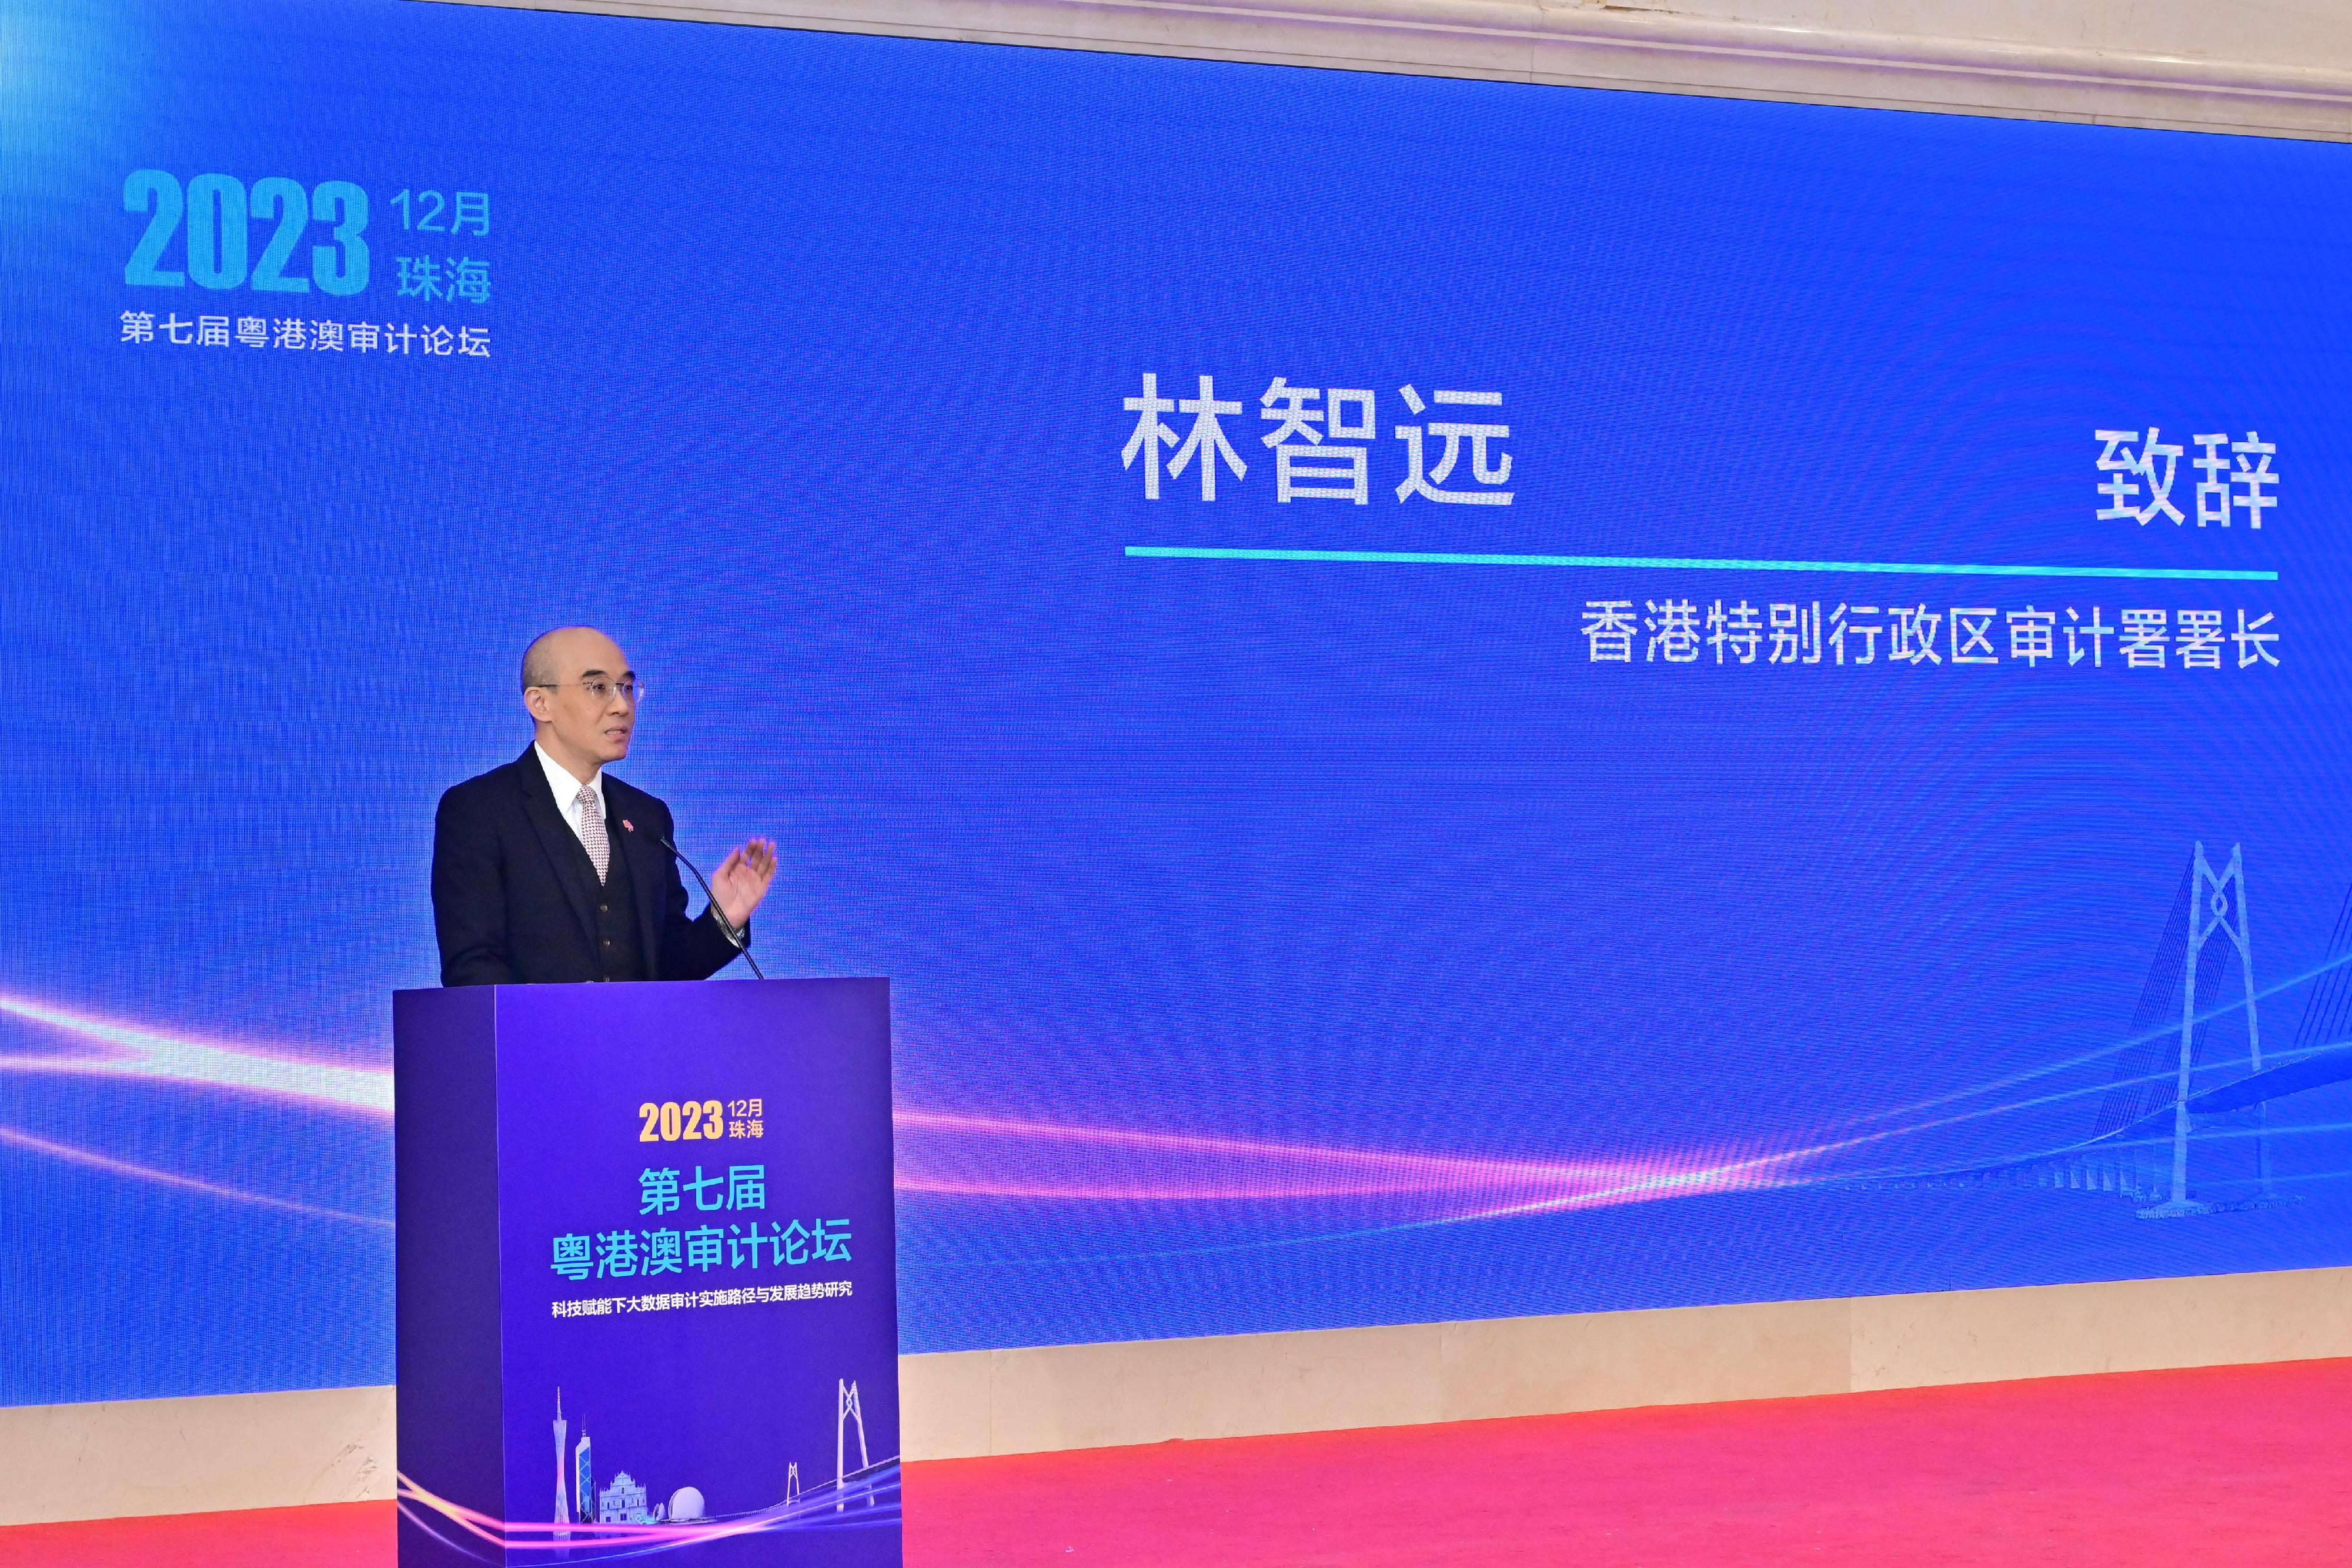 The Director of Audit, Professor Nelson Lam, shared with the audience of the 7th Guangdong-Hong Kong-Macao Audit Conference 2023 in his opening ceremony speech on December 6 that the Audit Commission was working on the second phase of the Smart Audit Information System.
 
